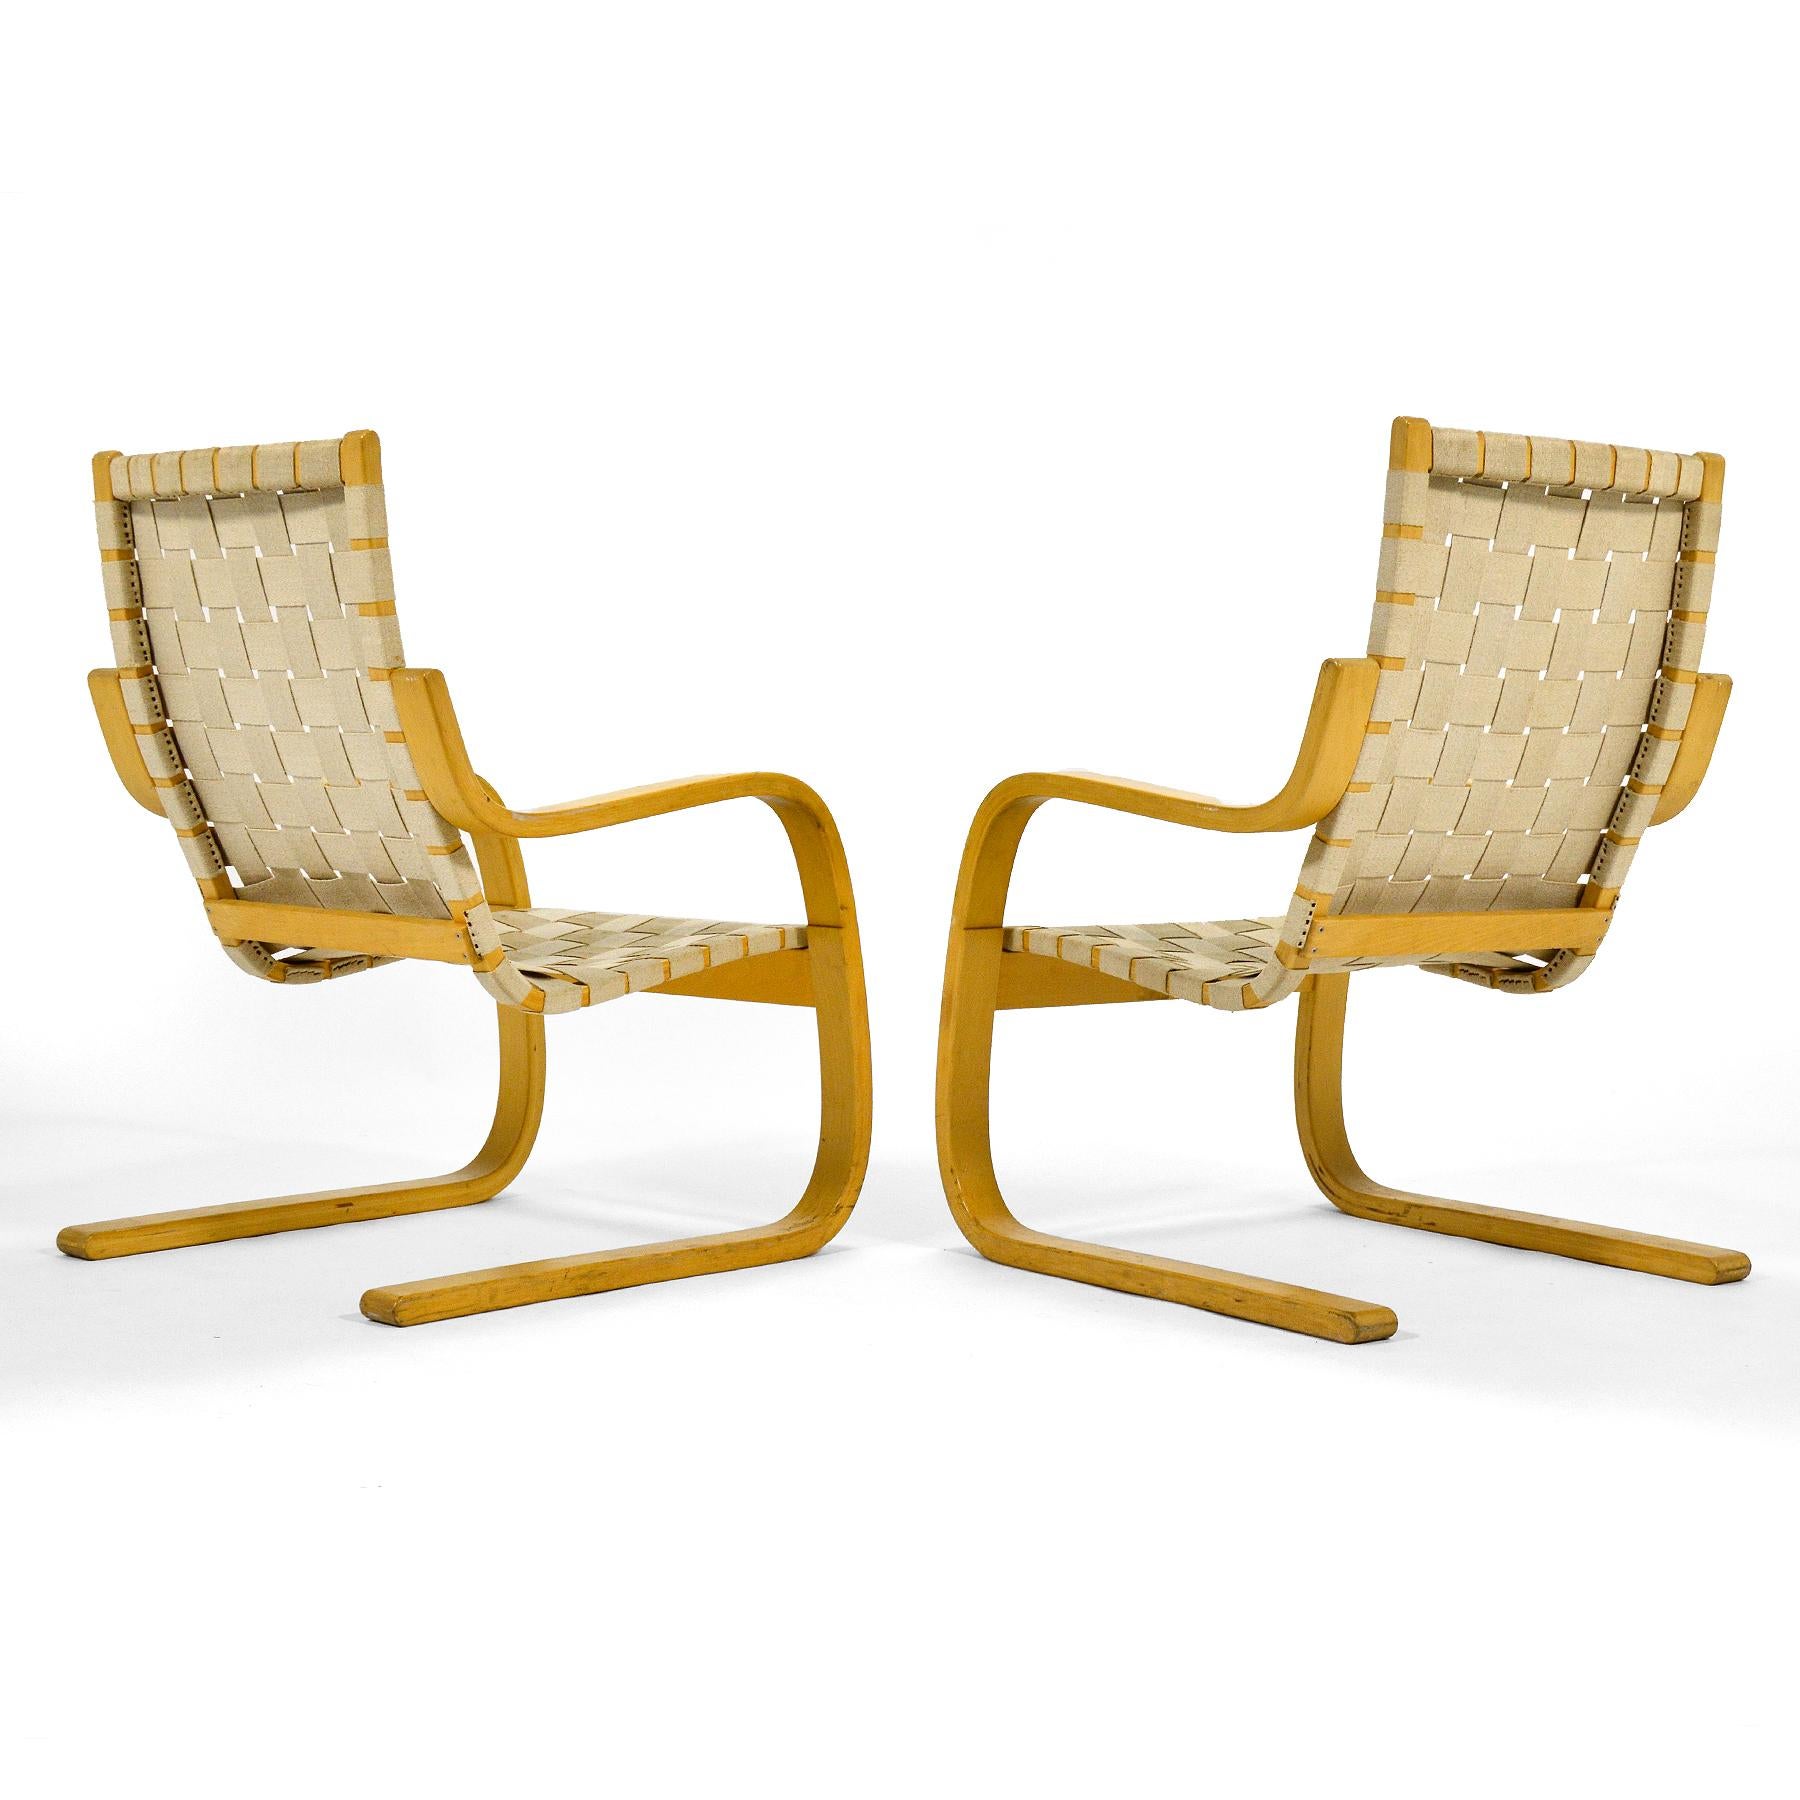 Finnish Alvar Aalto Model 406 Lounge Chairs For Sale